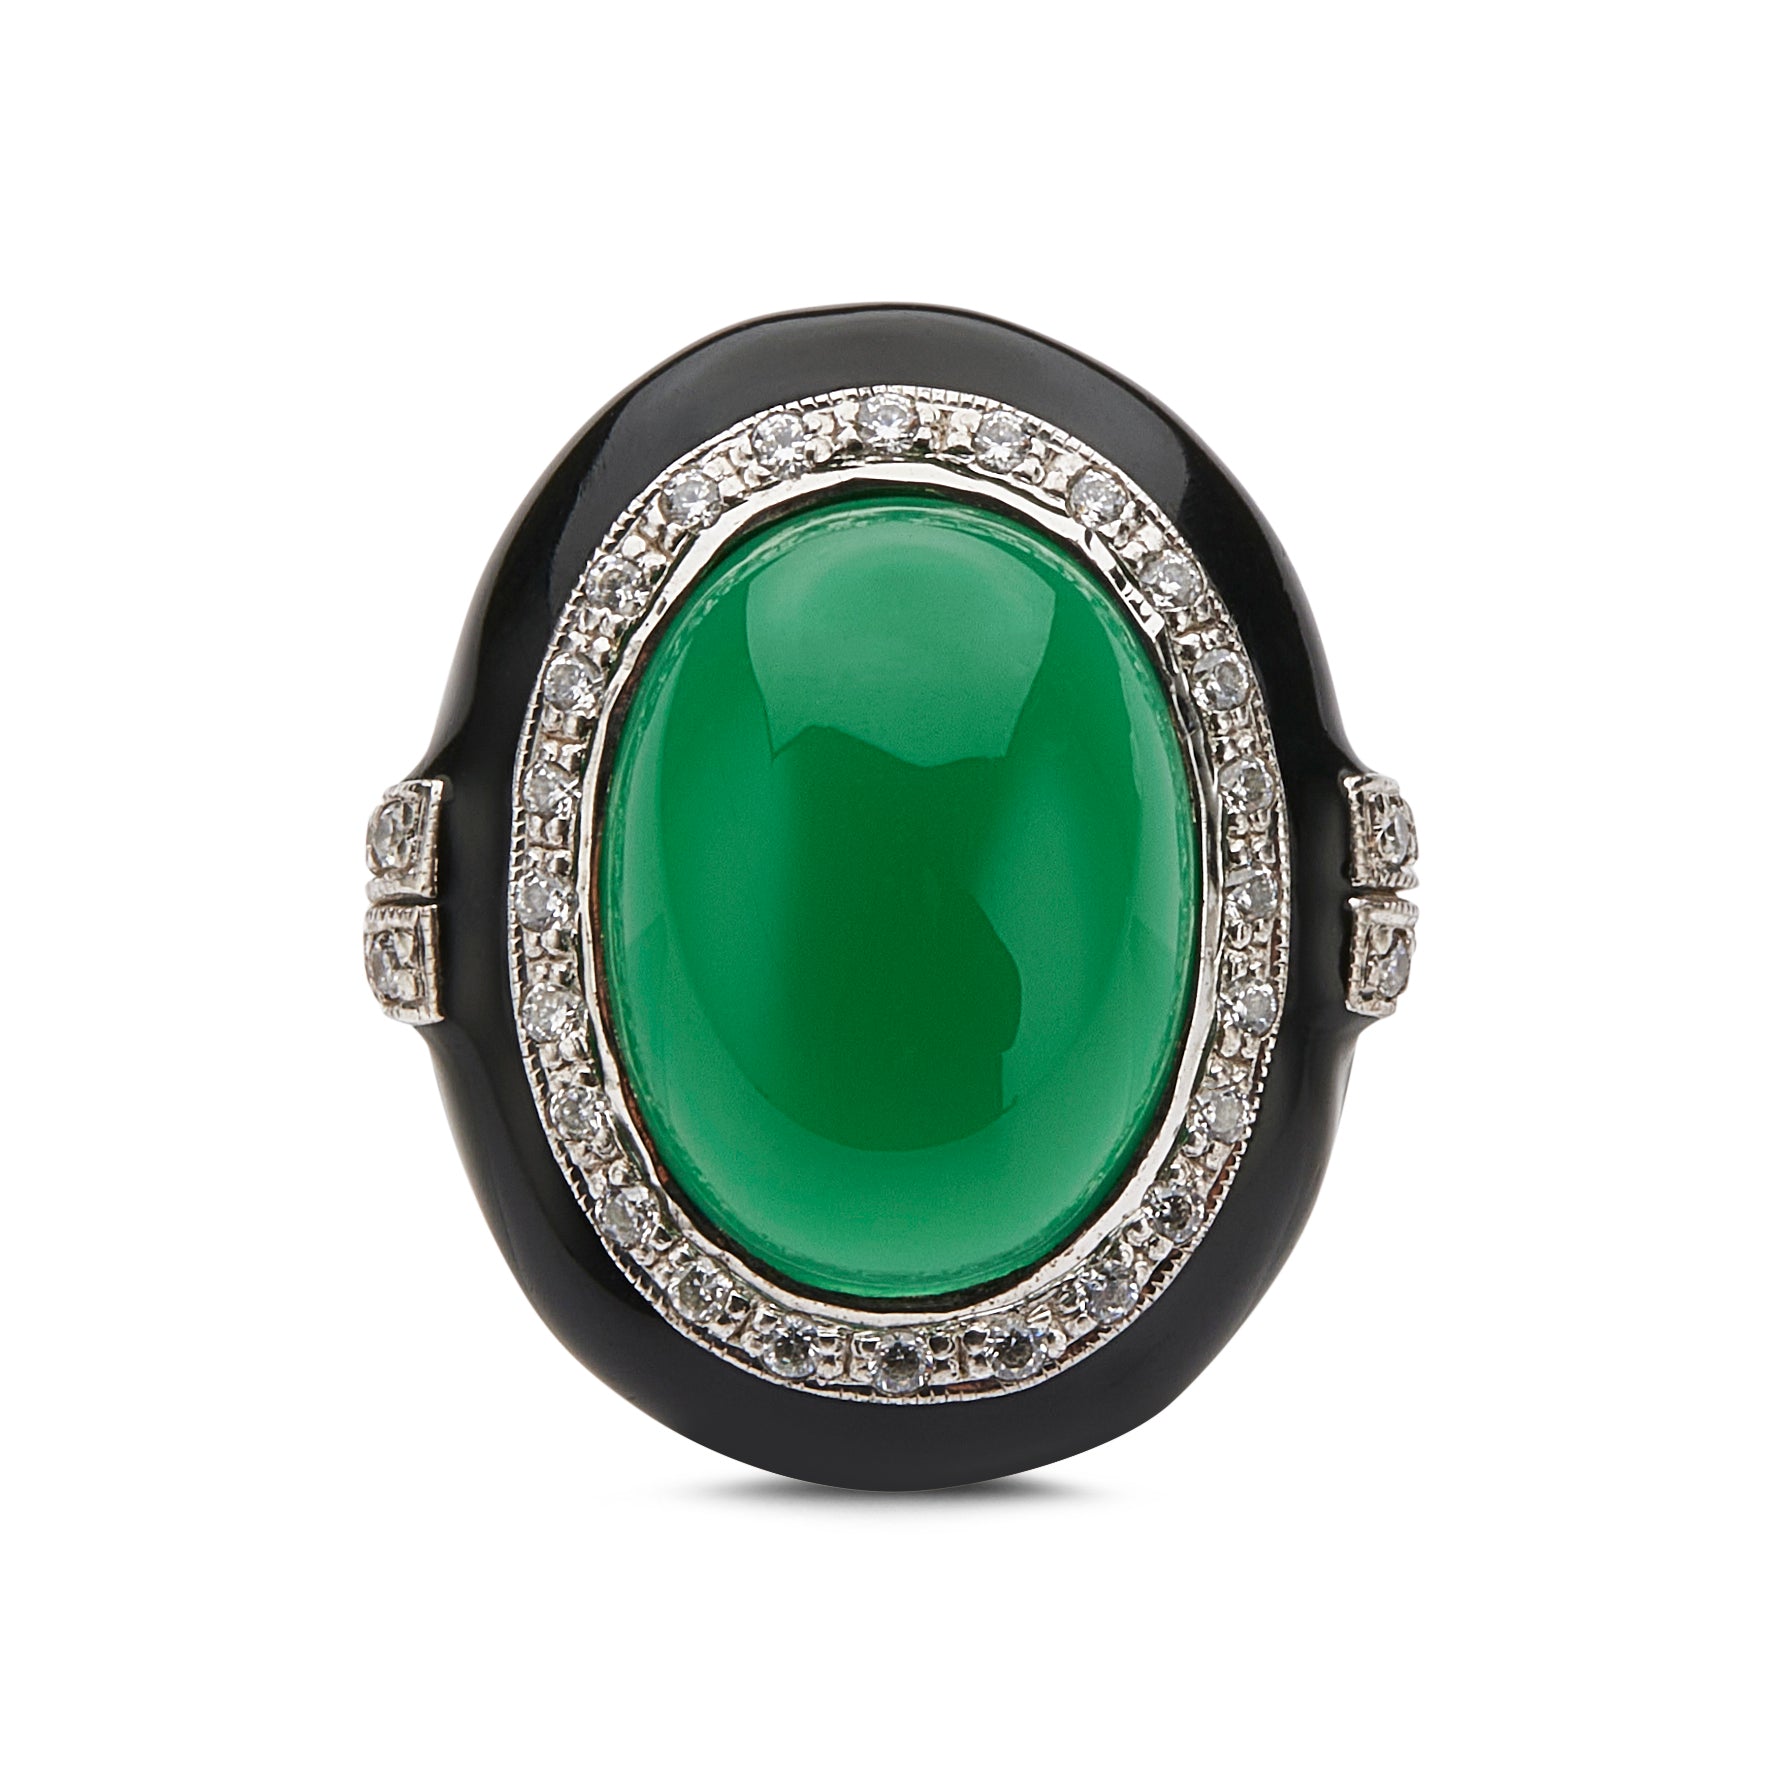 Green Agate, Diamond and Onyx Cocktail Ring